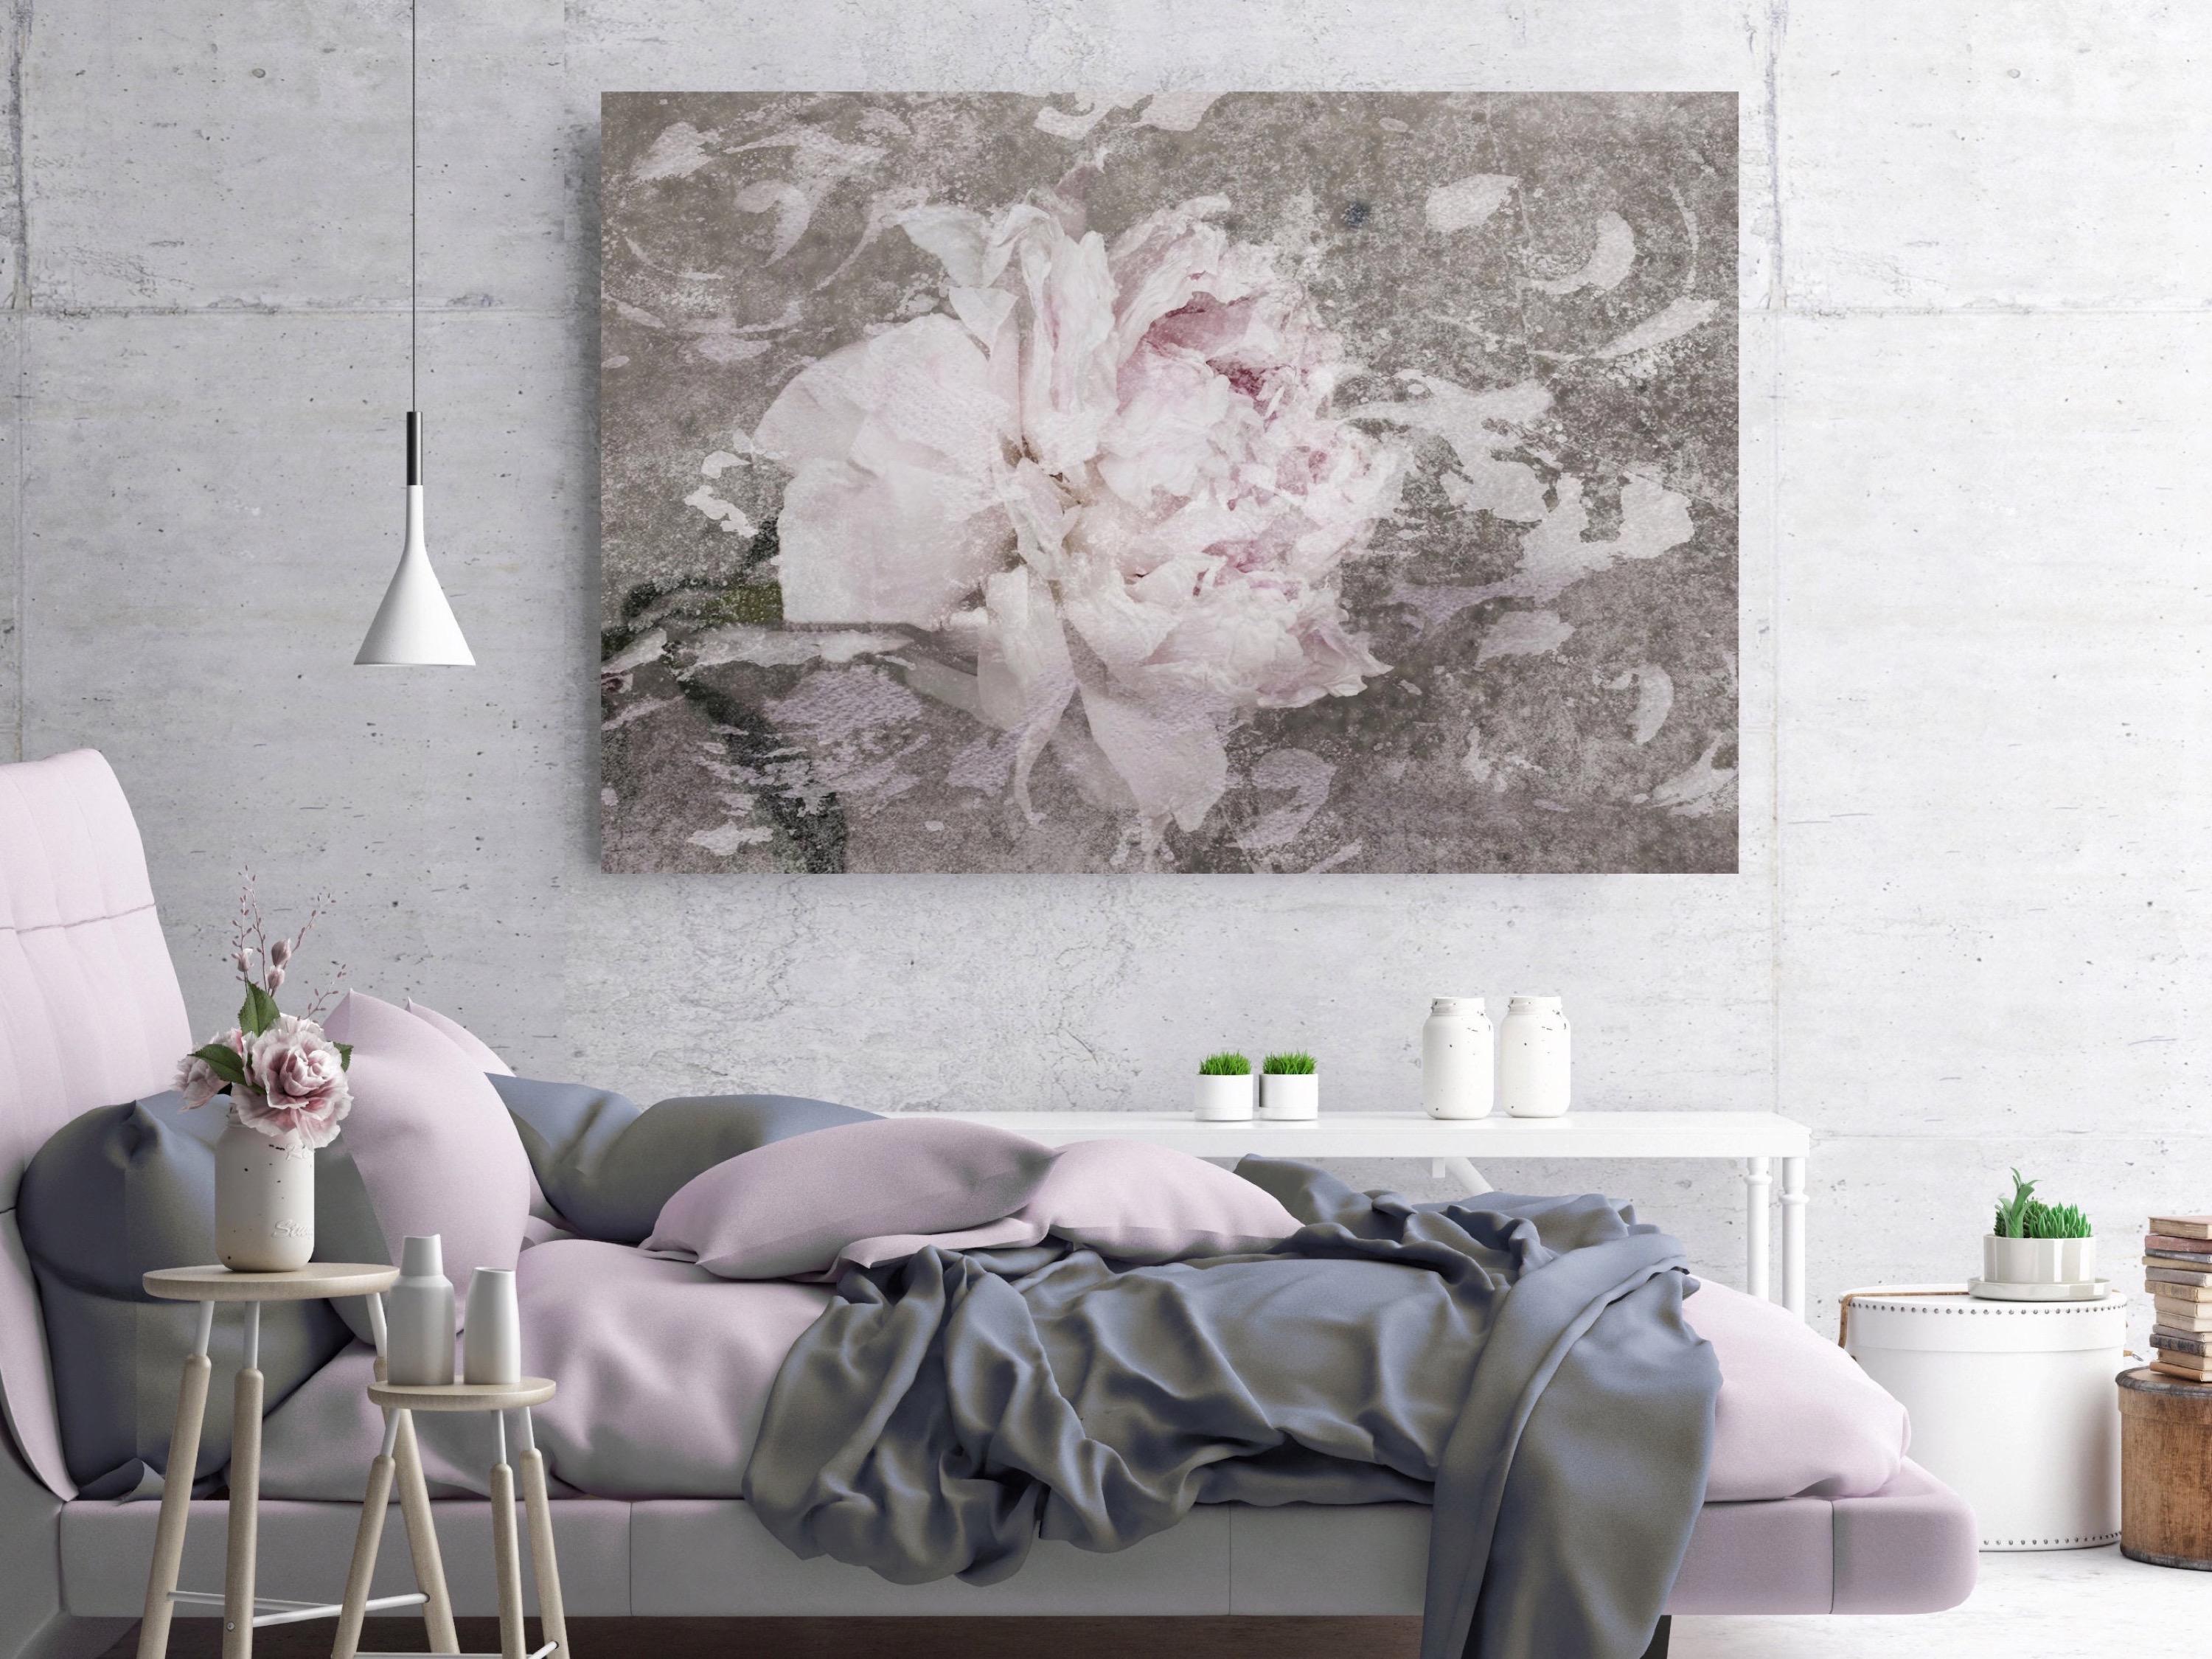 Blush Gray Spring Peony 1, Shabby Painting Hand Embellished Giclee on Canvas

Collector's Edition Embellished Art Canvas Giclee With Brushstrokes and rich texture.

State-of-the-art HAND EMBELLISHED ∽ MUSEUM QUALITY ∽ DISPLAY READY Giclee